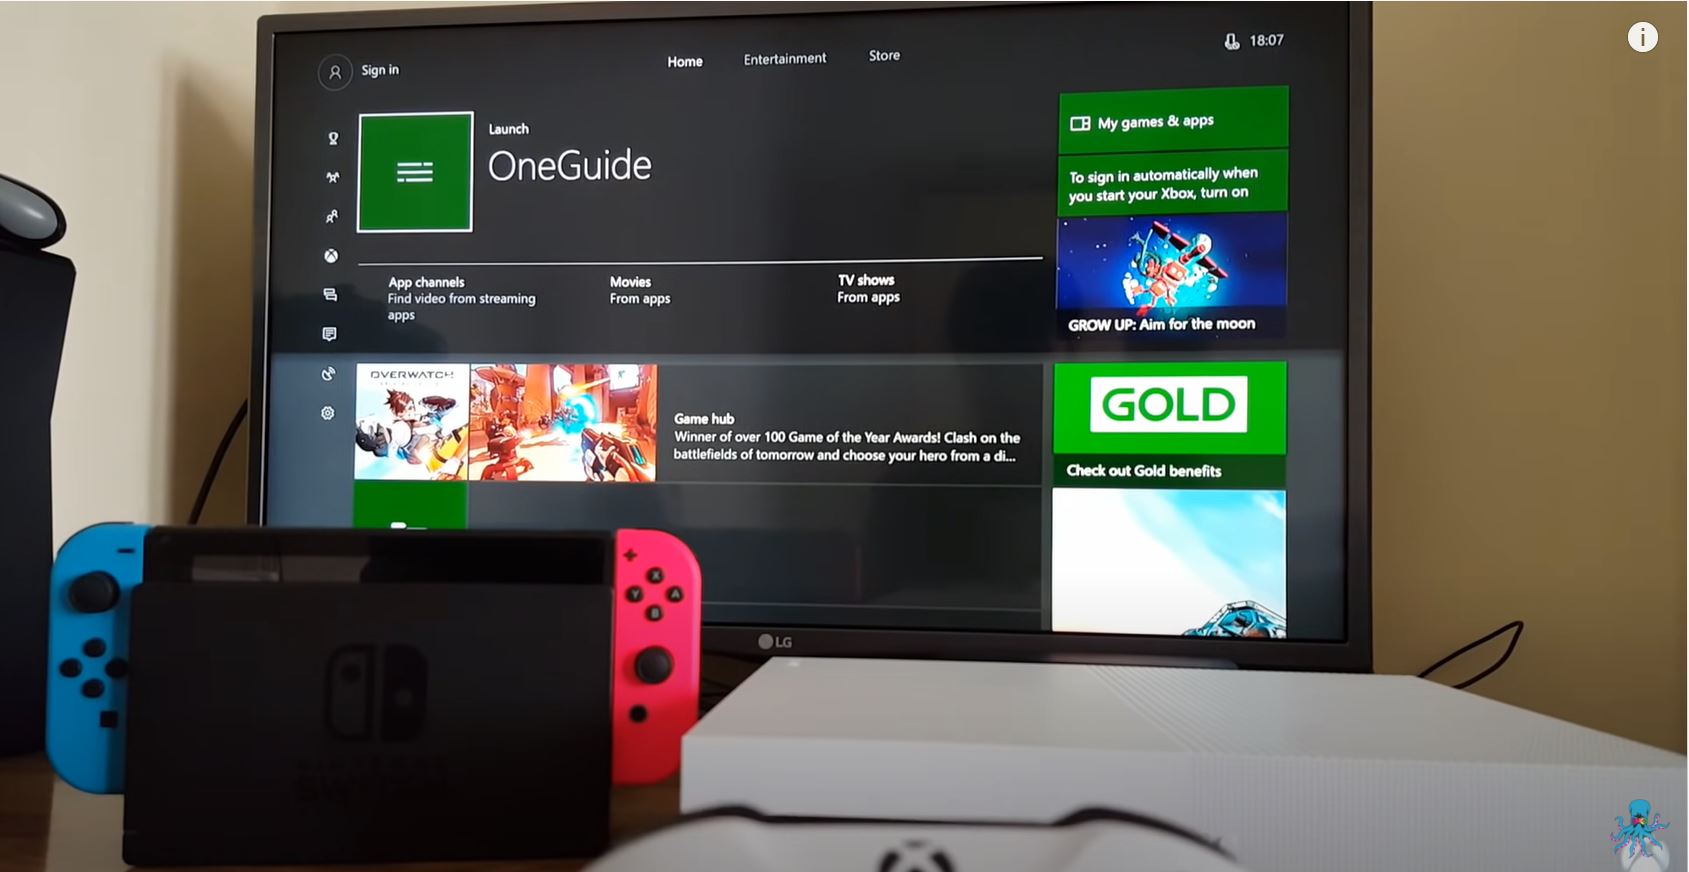 launch Xbox app on PC for Streaming Switch